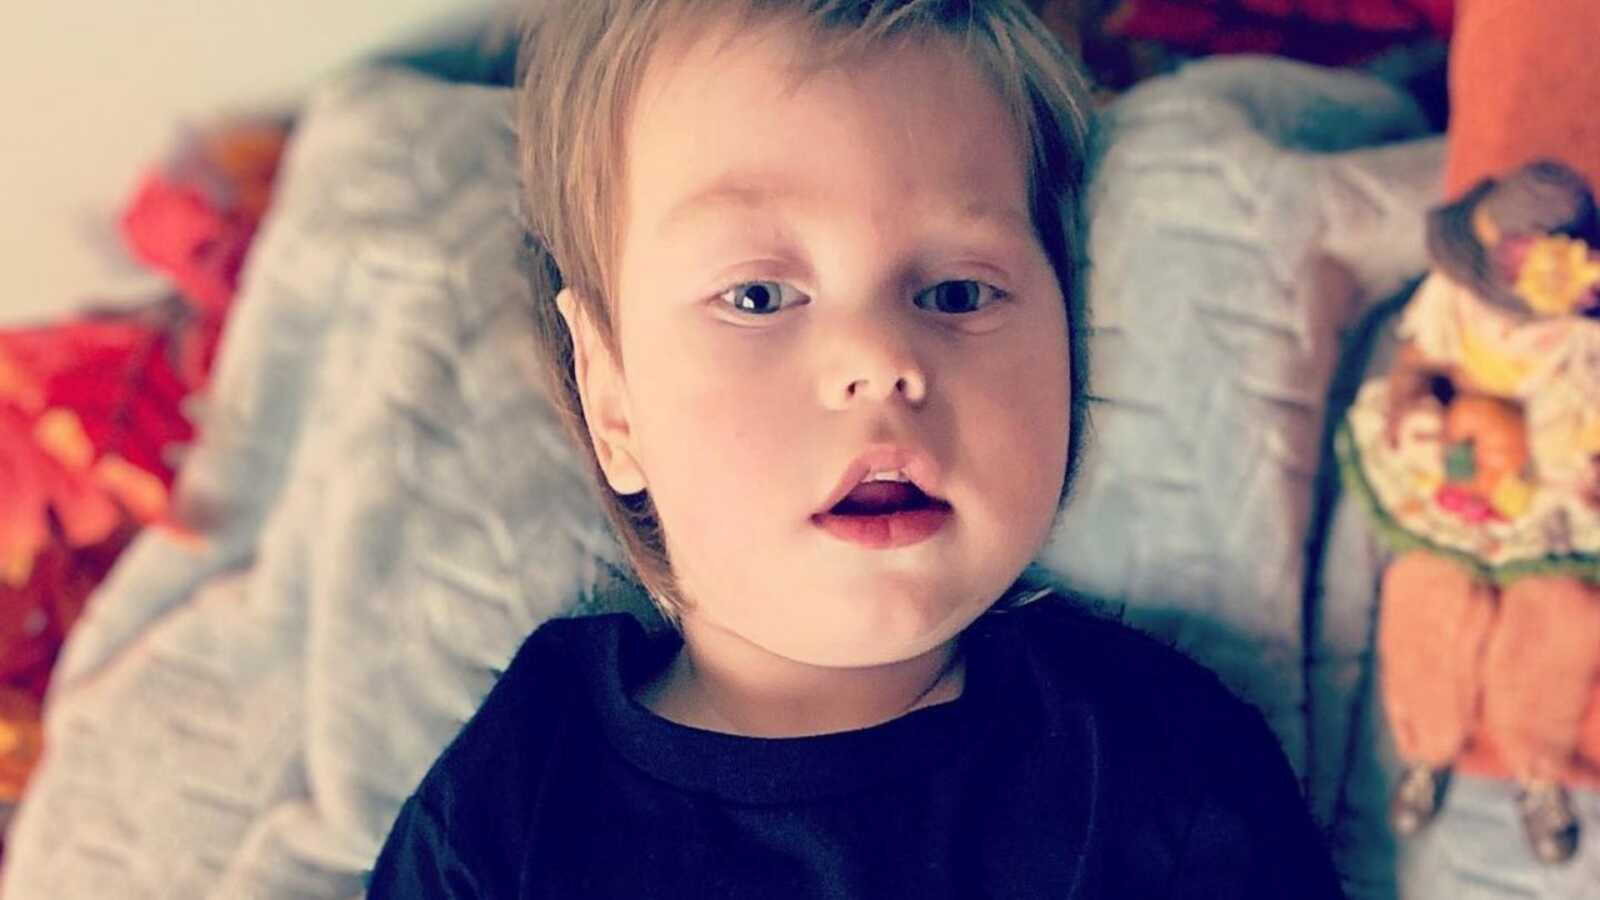 little boy with epilepsy and infantile spasms diagnosis